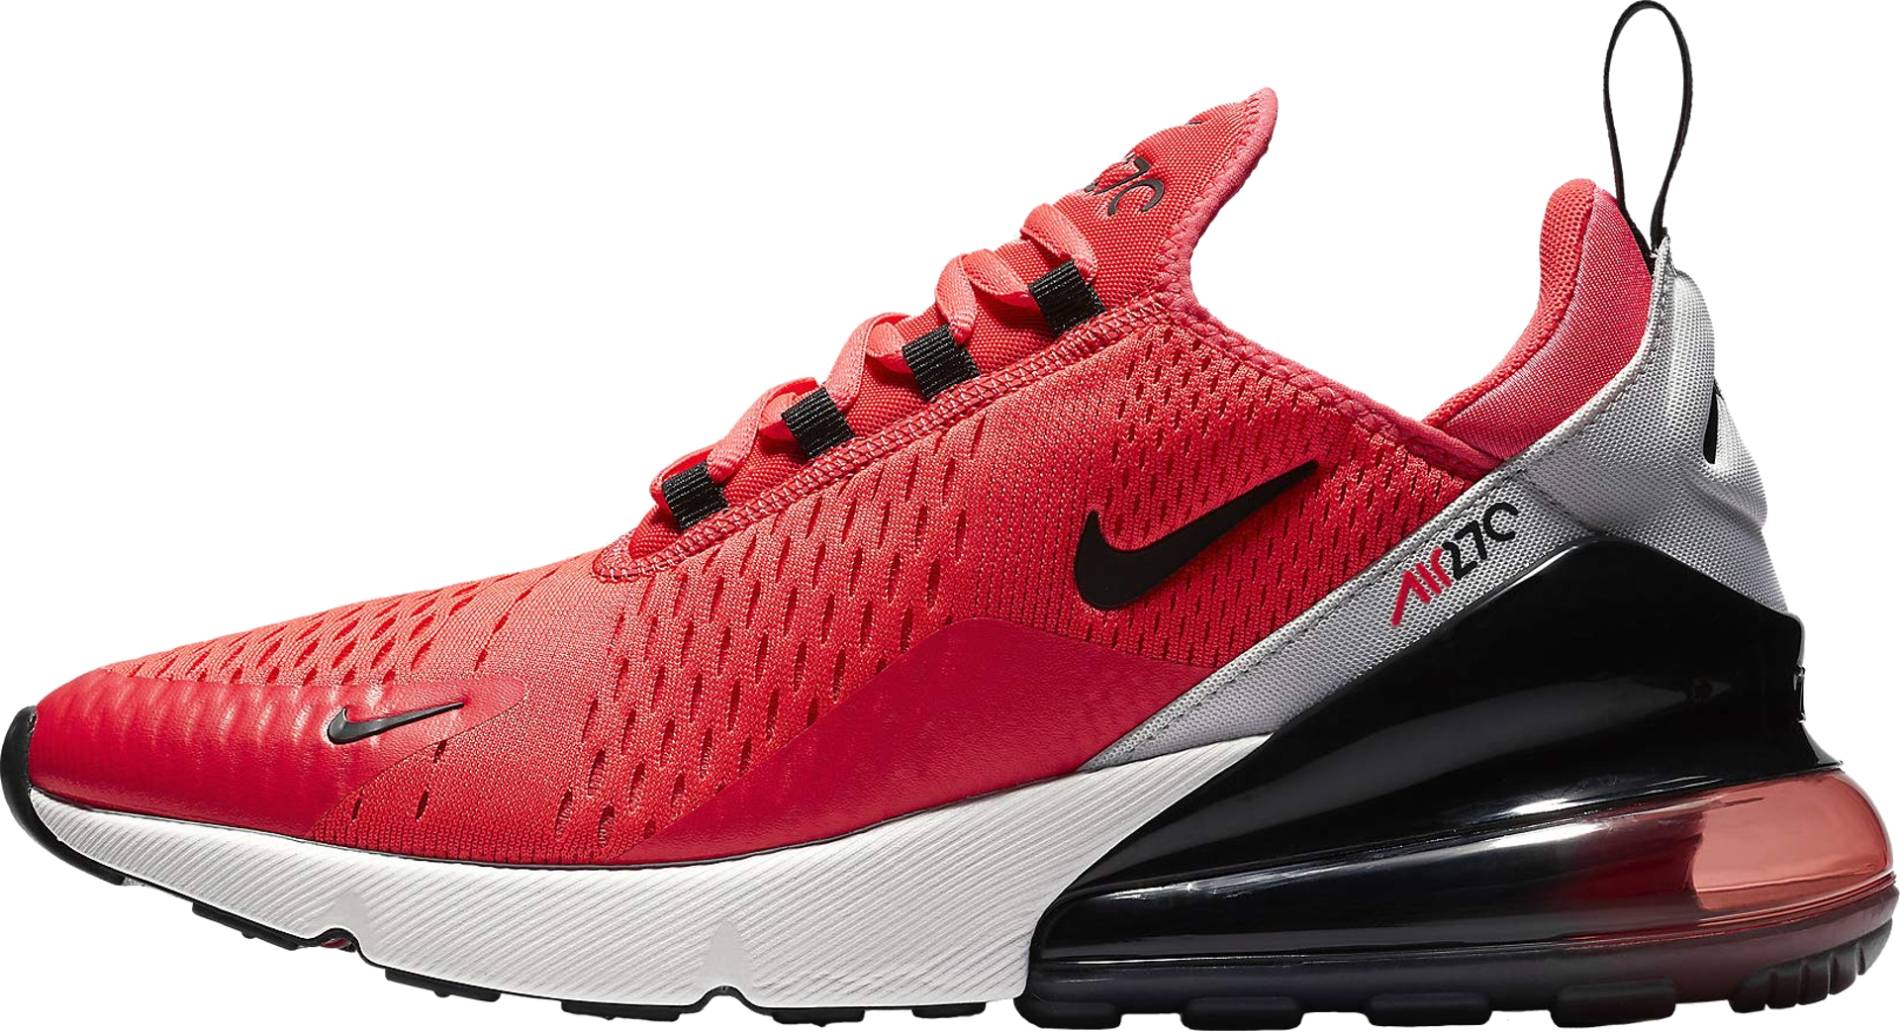 red colour nike shoes